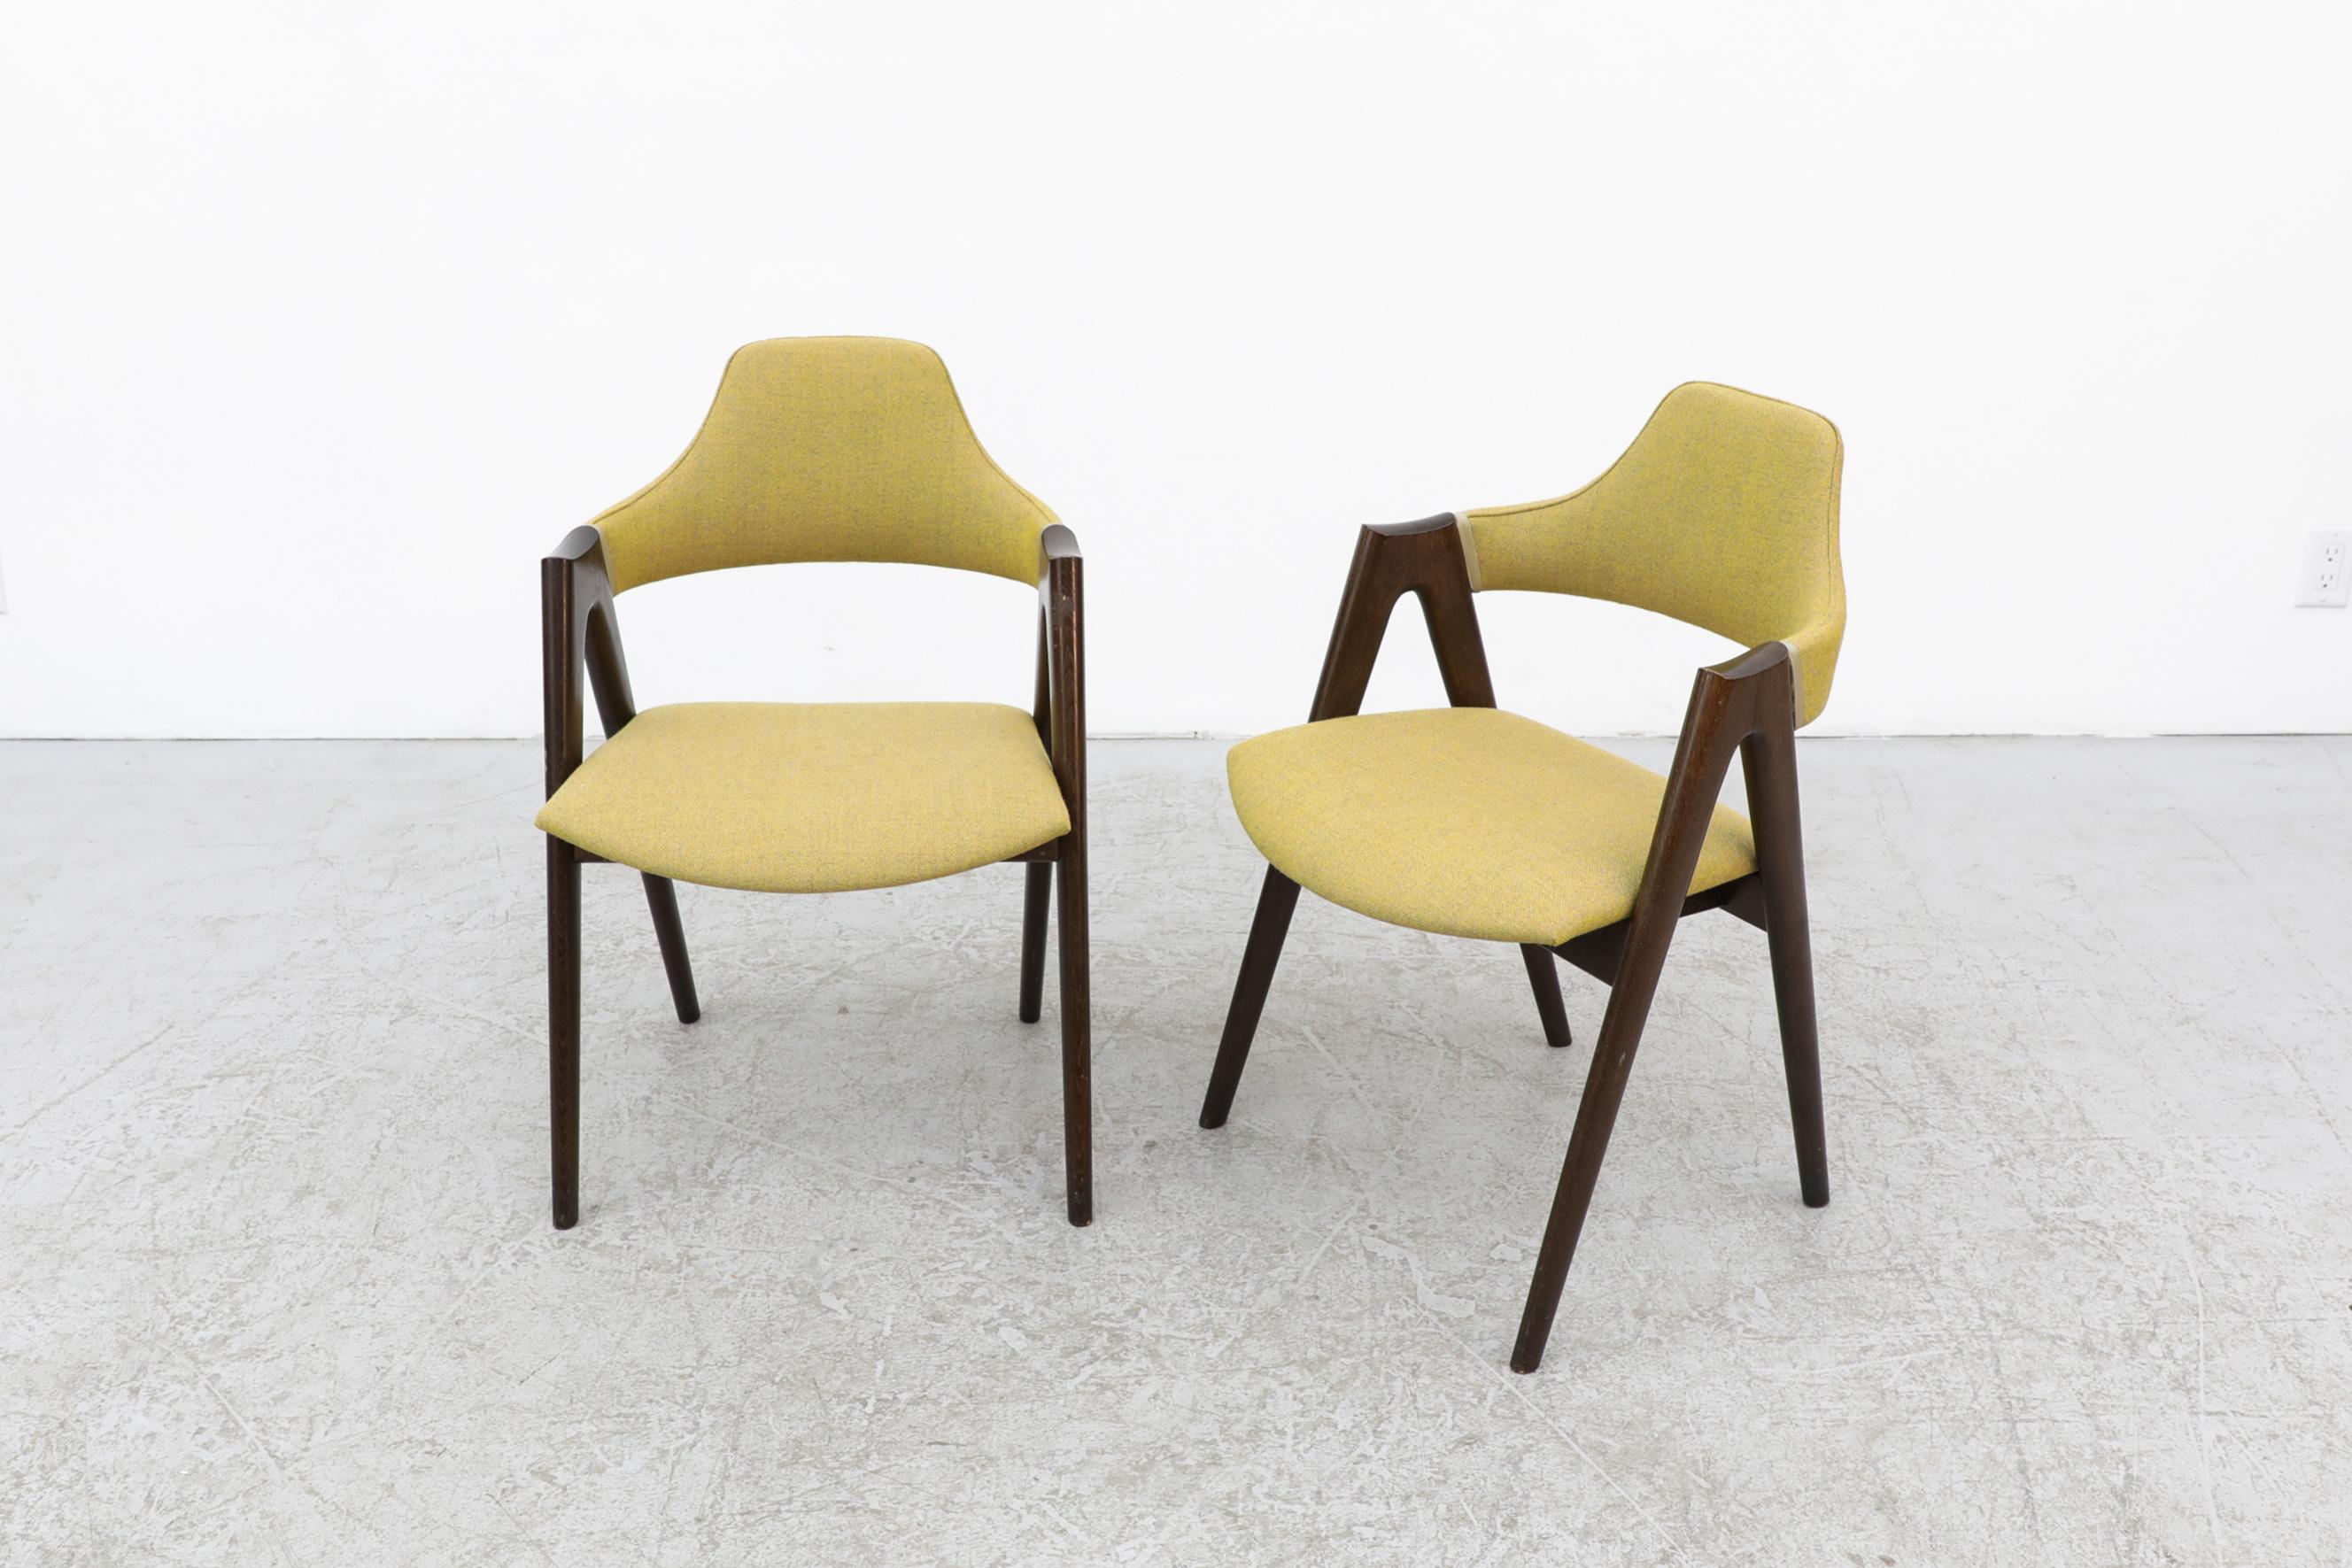 Upholstery Pair of Kai Kristiansen Dark Stained Wood Framed Compass Chairs in Kiwi Fabric For Sale